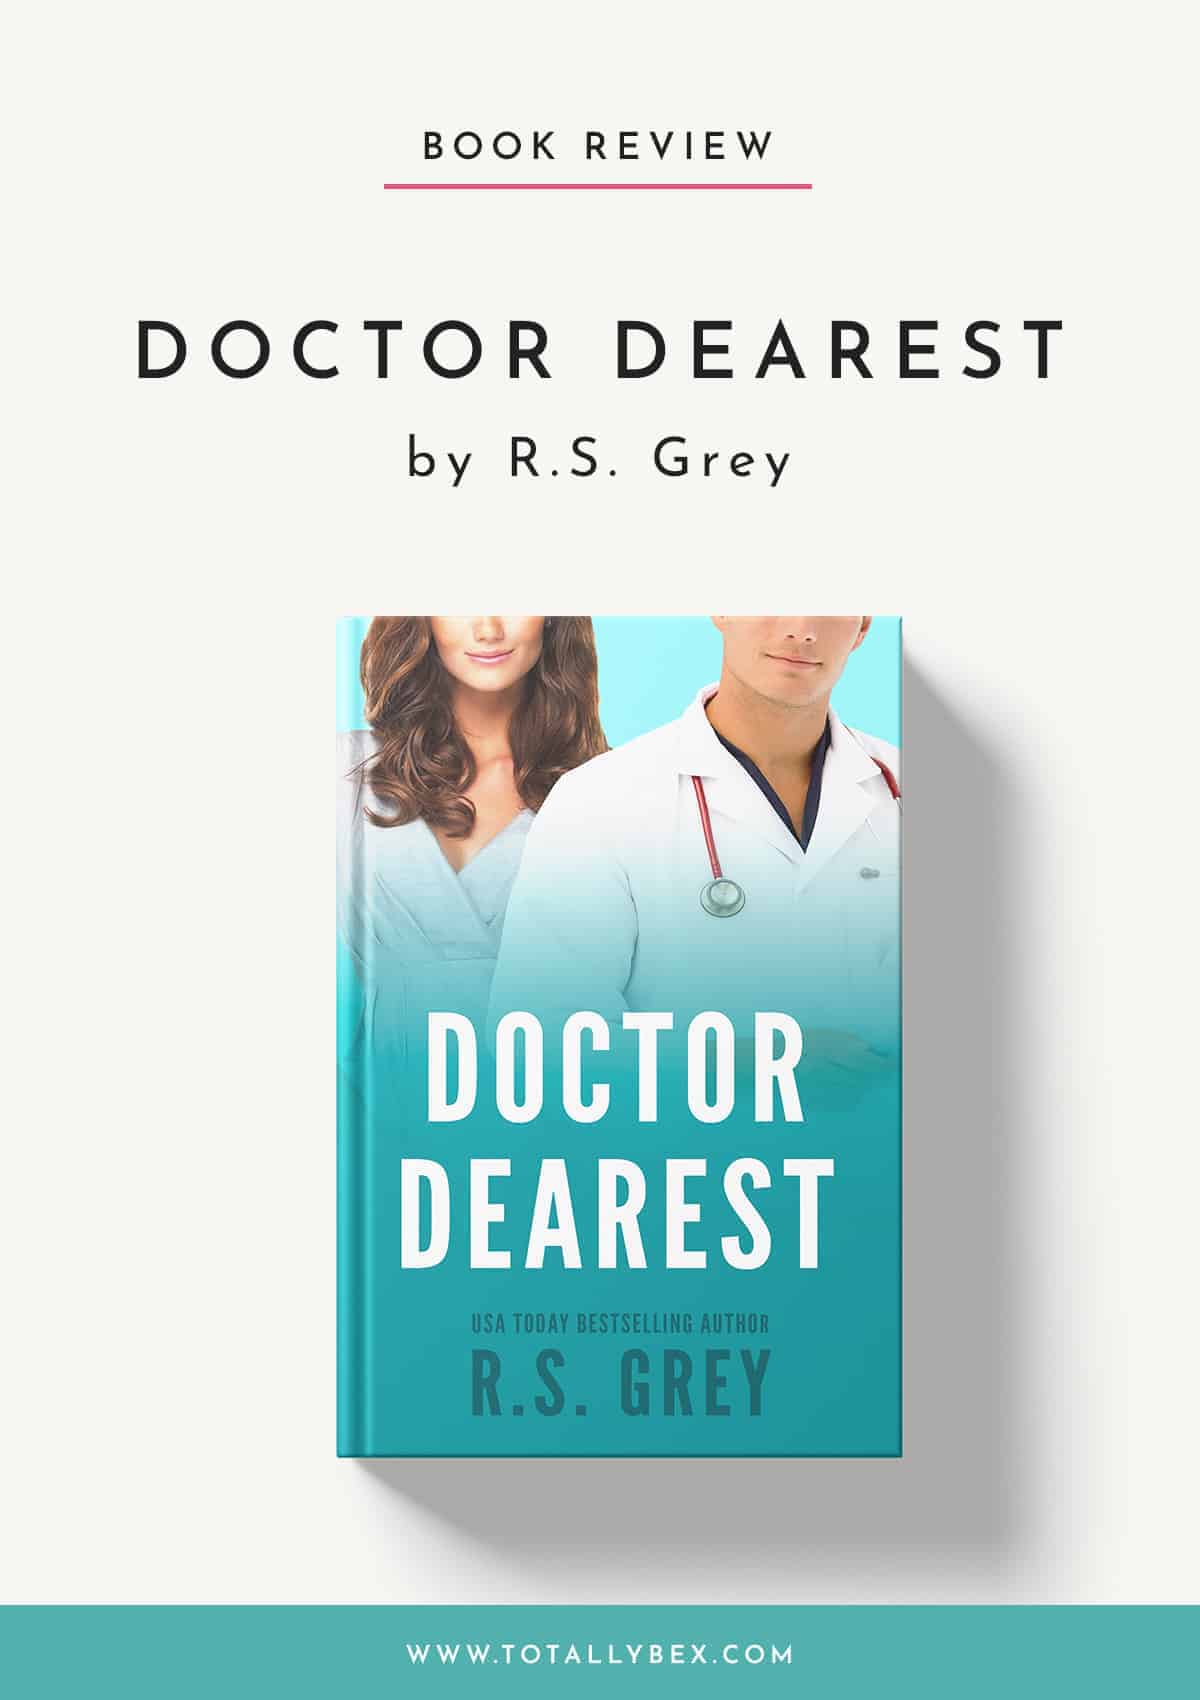 Fans of Grey's Anatomy will love Doctor Dearest by R.S. Grey! It's a hospital-based doctor romance with an unrequited love of a brother's best friend.